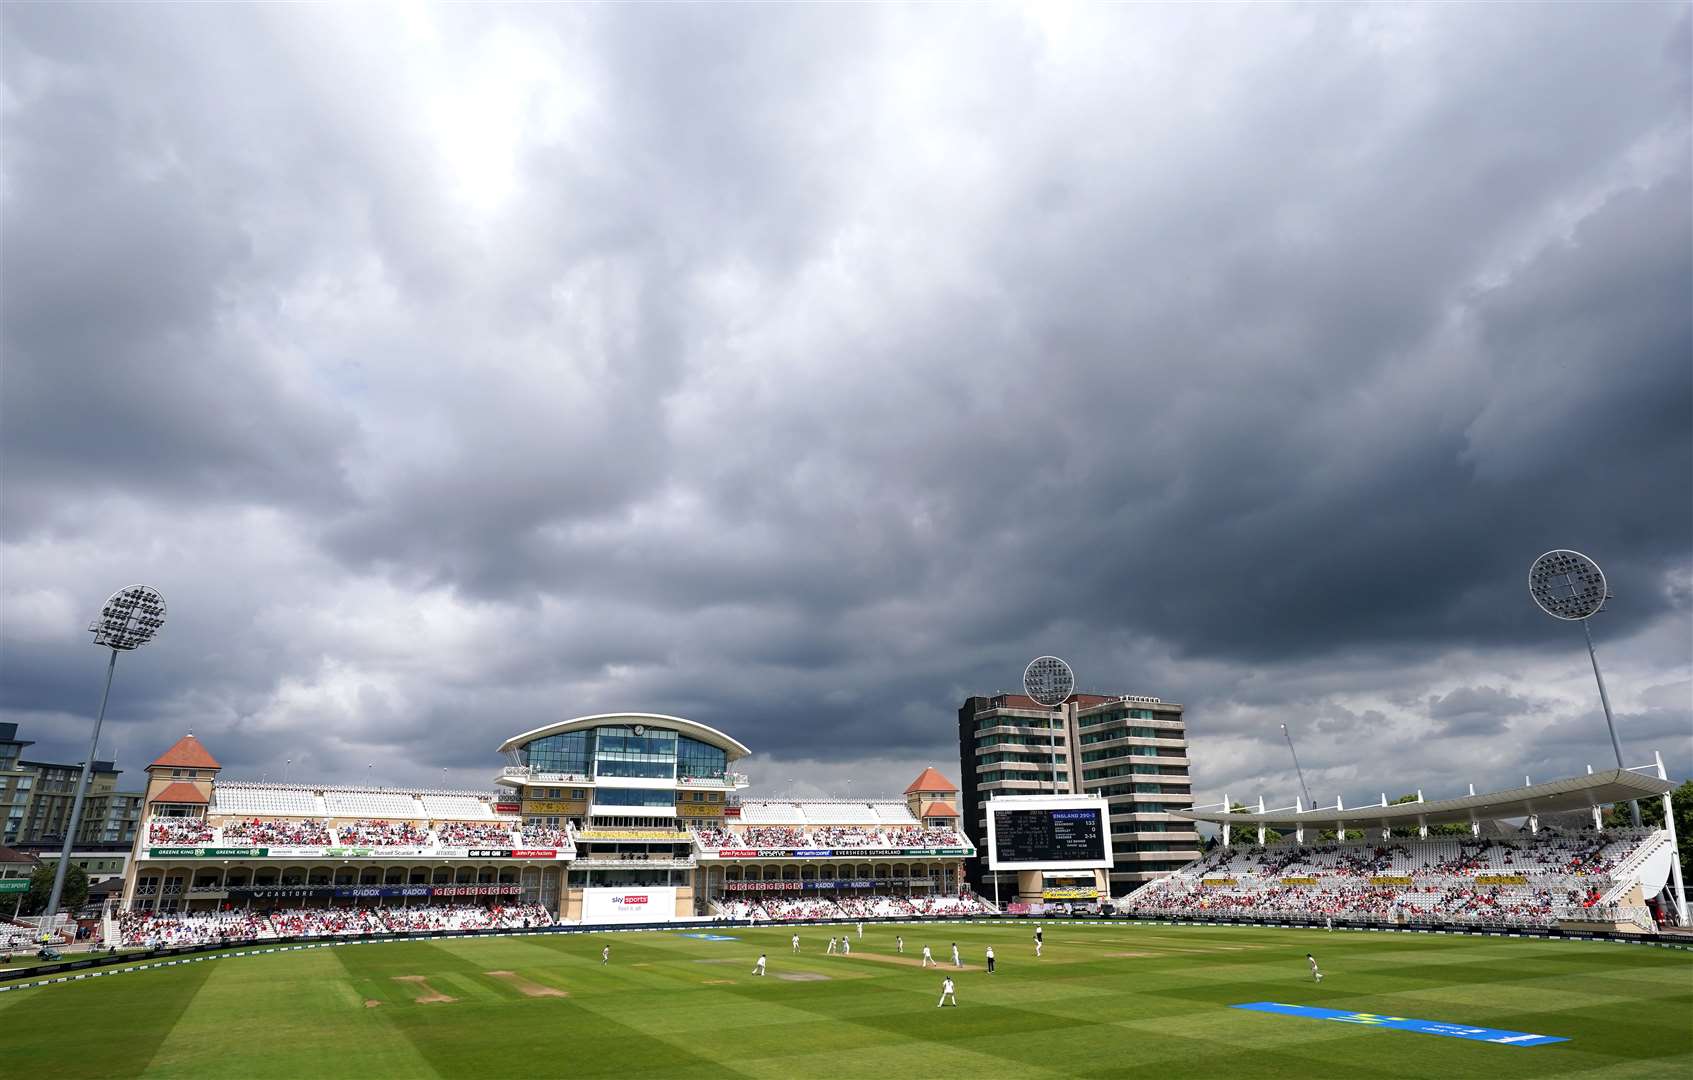 However, in Nottingham the skies above were more ominous as England took on Australia during day three of the first Women’s Ashes Test match at Trent Bridge (Tim Goode/PA)